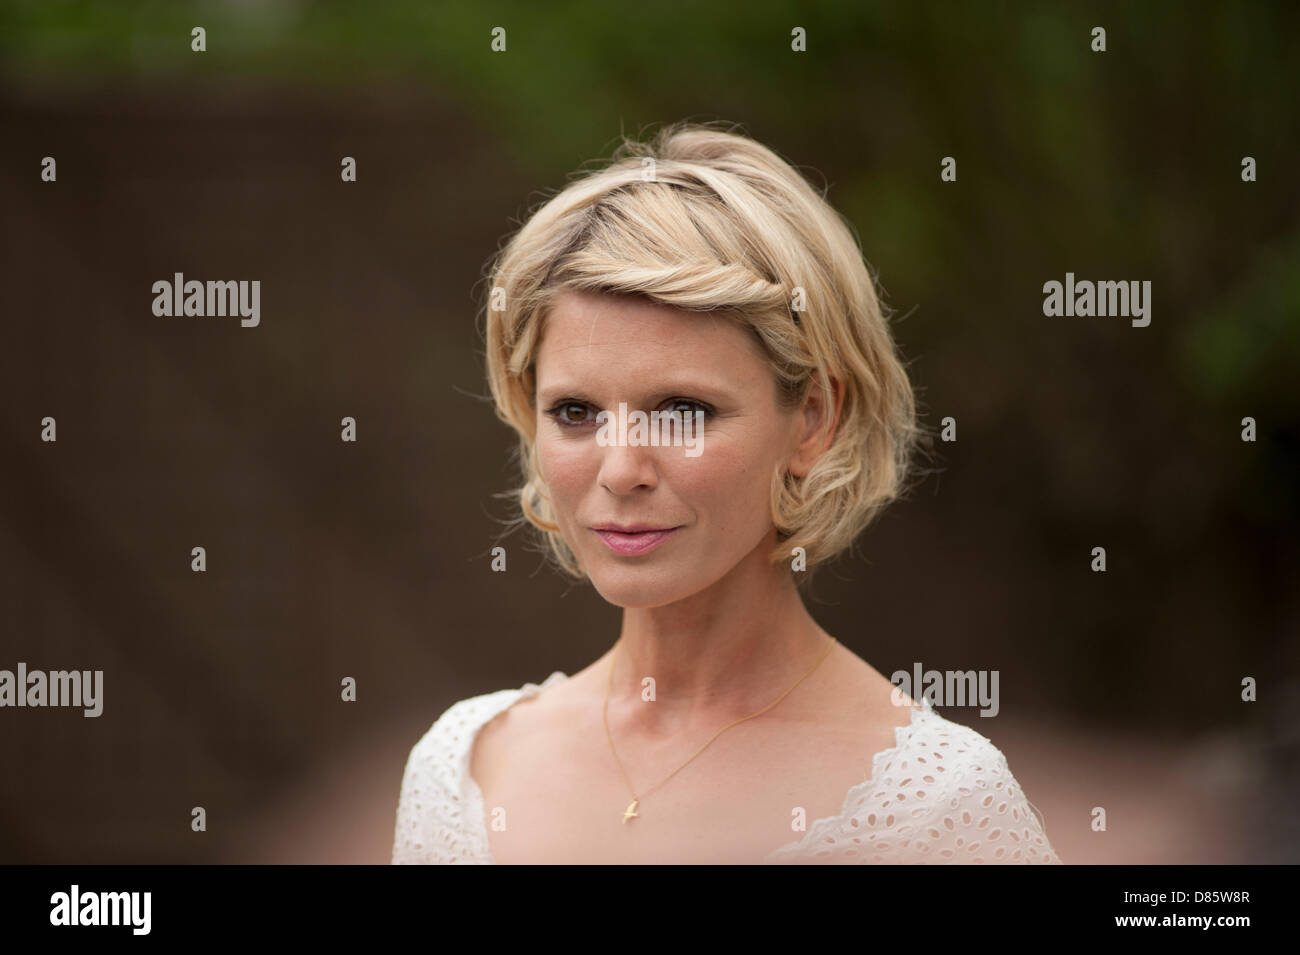 20.5.2013, London, UK. English actress Emilia Fox at the RHS Chelsea Flower Show Press Day. Stock Photo